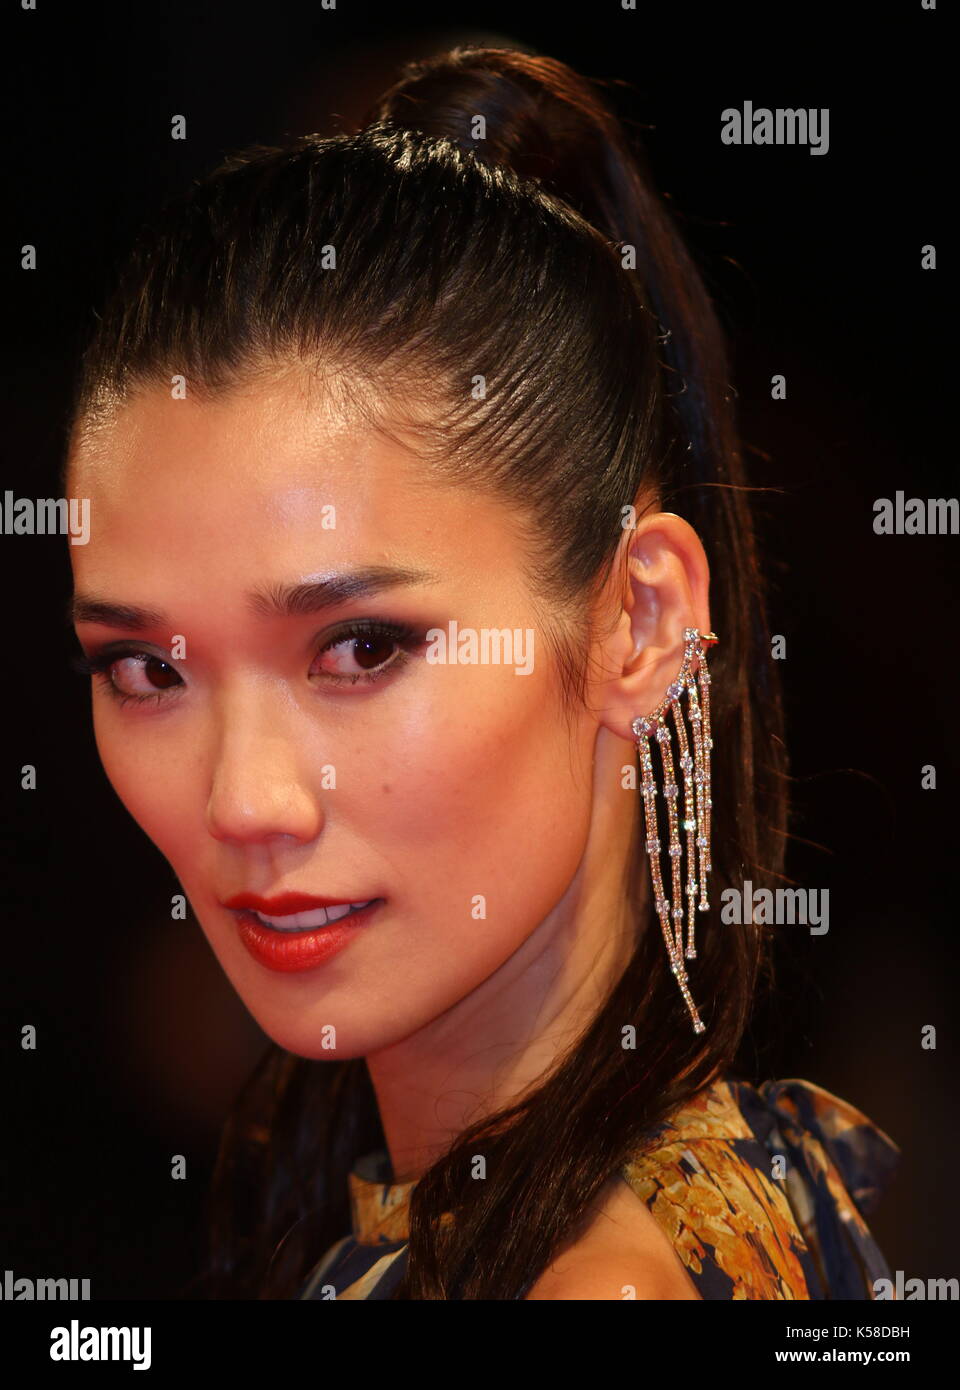 Venice, Italy. 8th September, 2017. Actress Tao Okamoto attends at the Premiere of the movie 'Manhunt (Zhuibu)' during the 74th Venice International Film Festival at Lido of Venice on 8th September, 2017. Credit: Andrea Spinelli/Alamy Live News Stock Photo